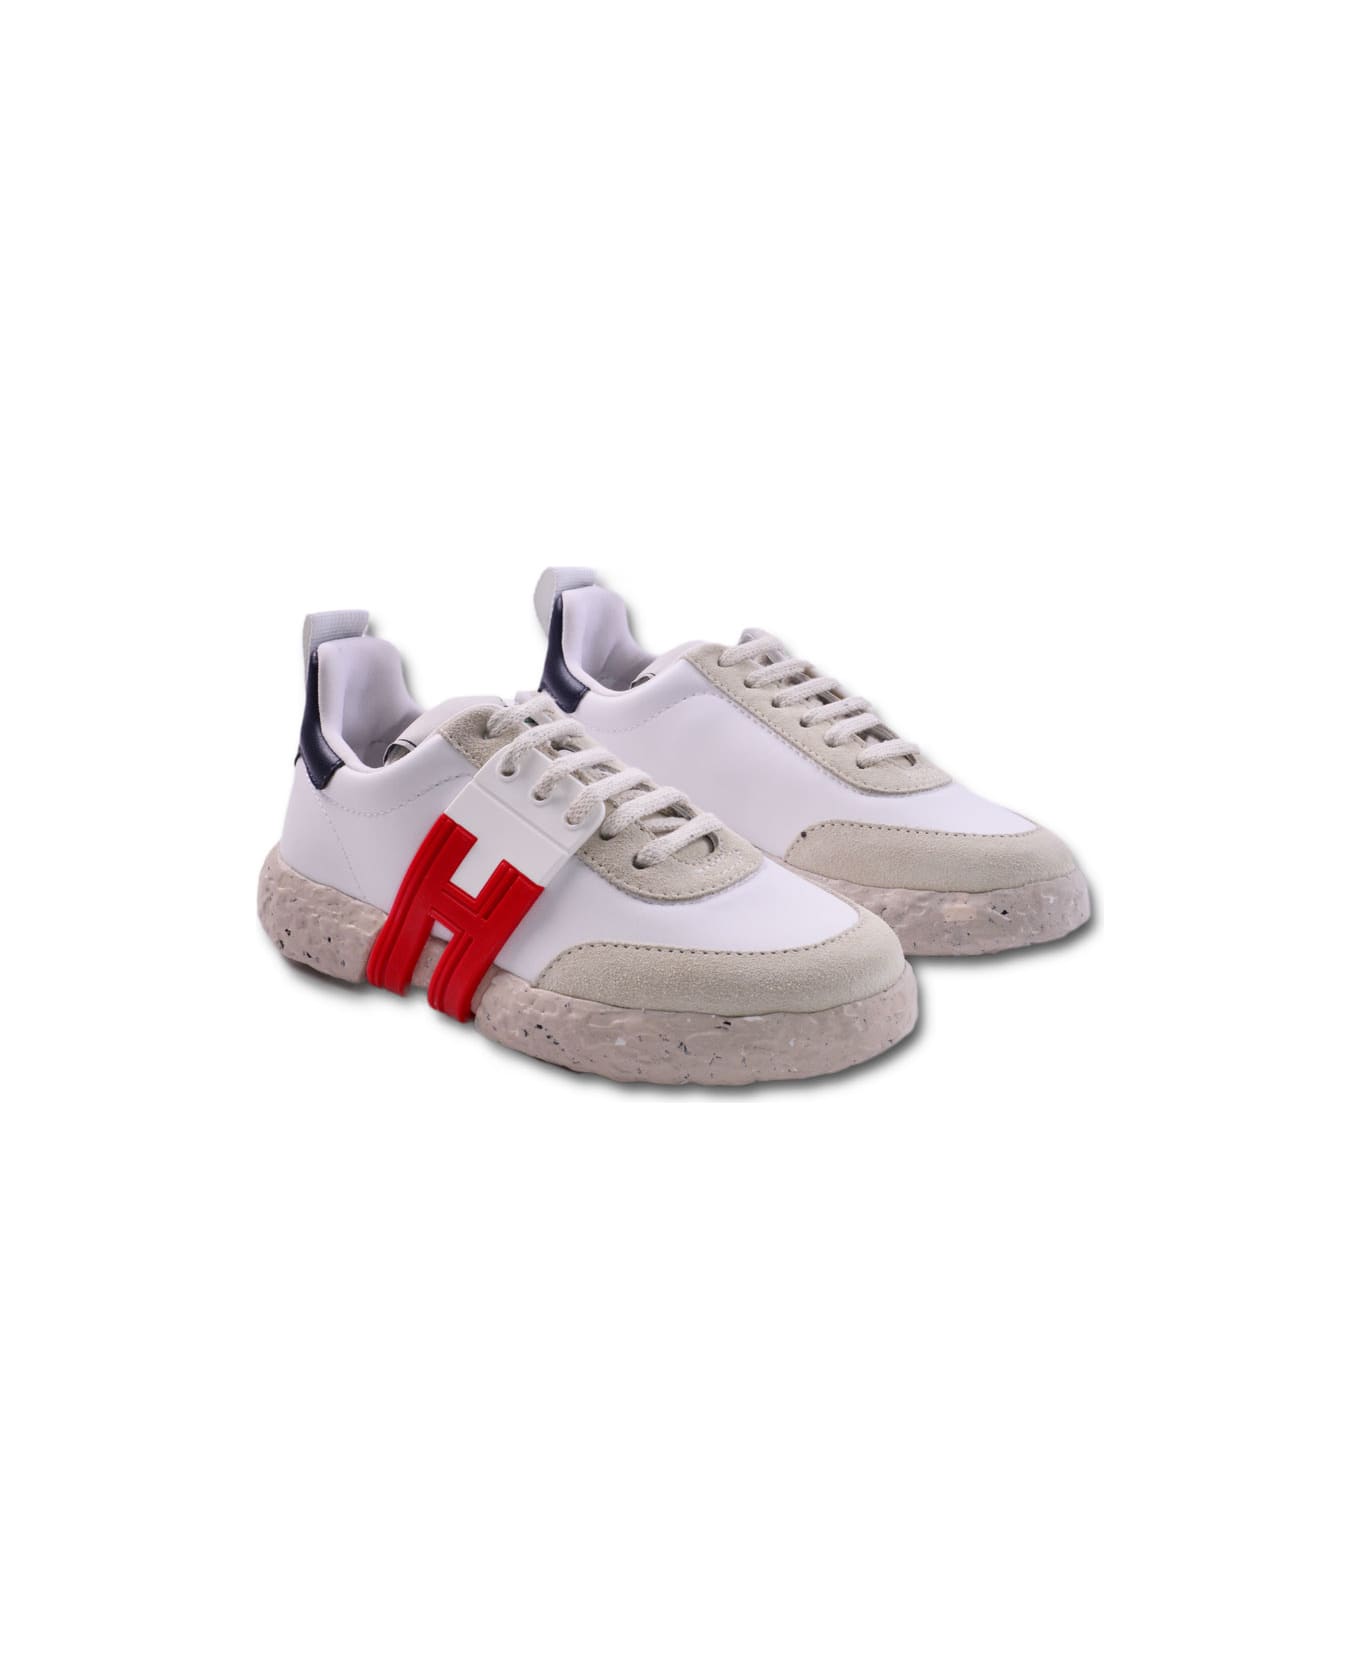 Hogan 3r Sneakers In Leather - White シューズ